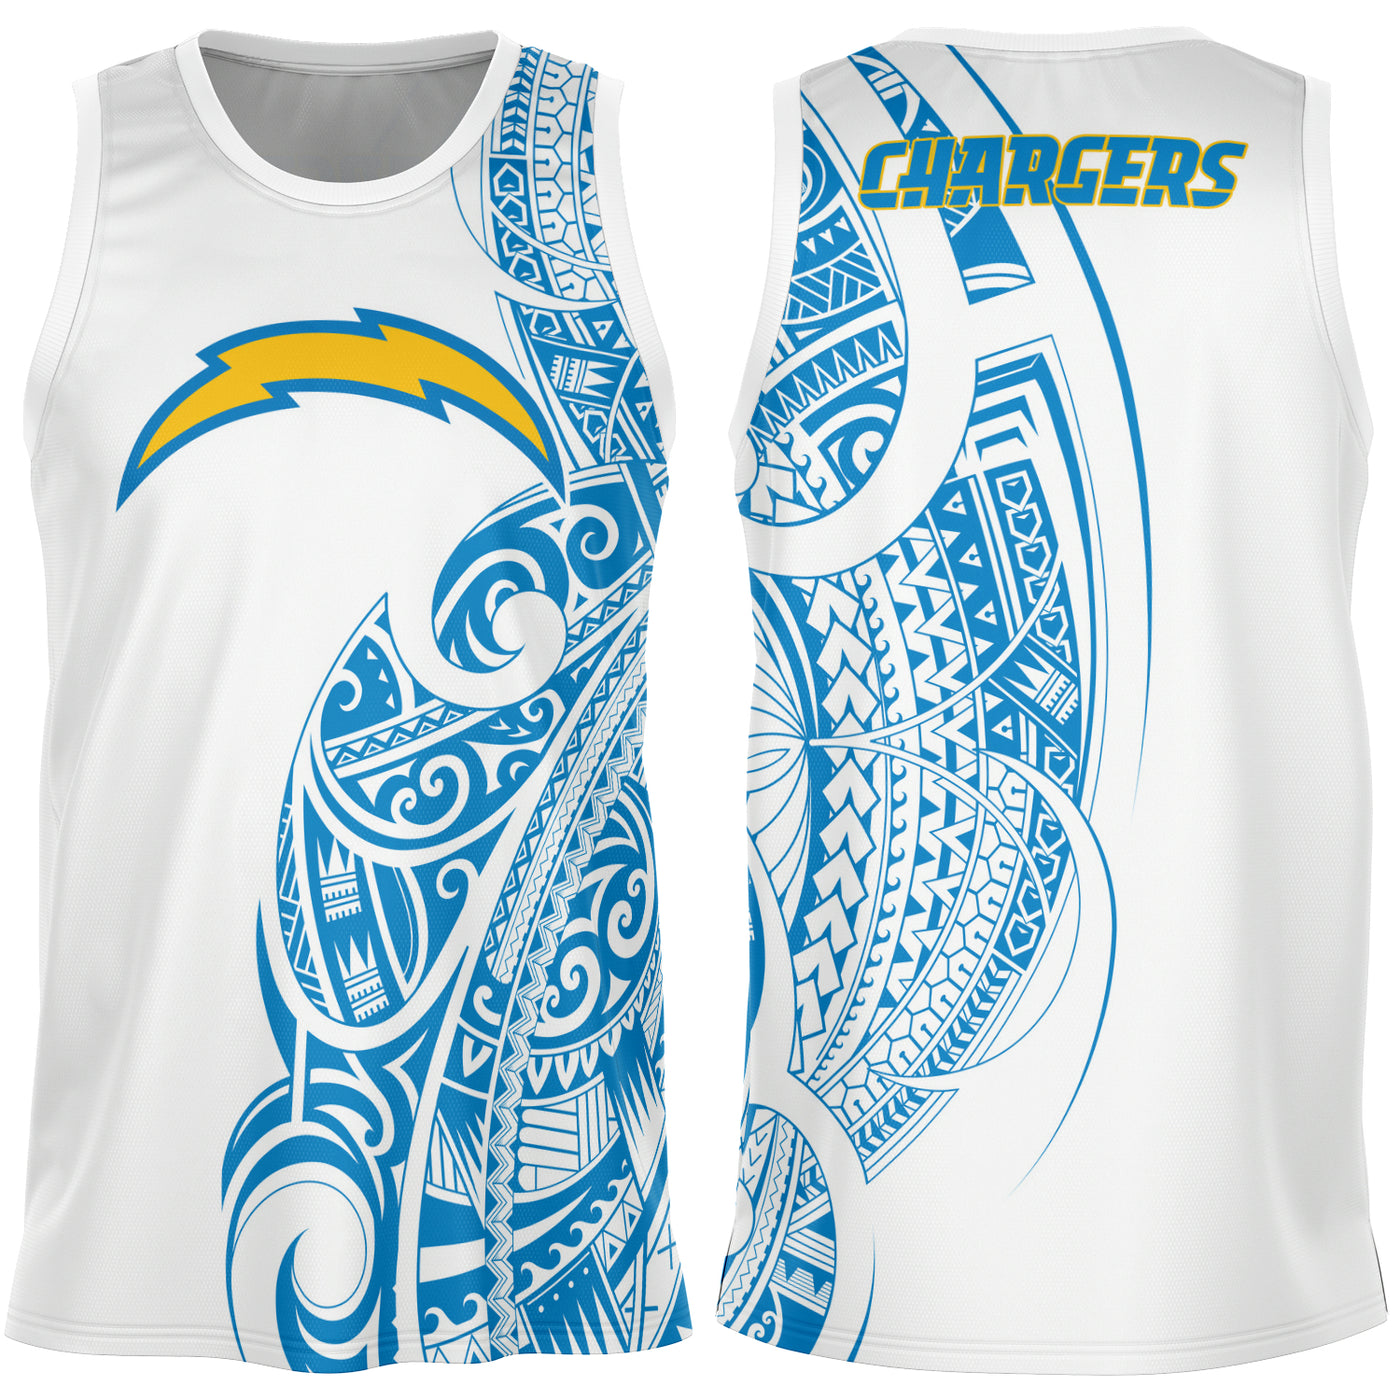 Los Angeles Chargers Pet Mesh Jersey